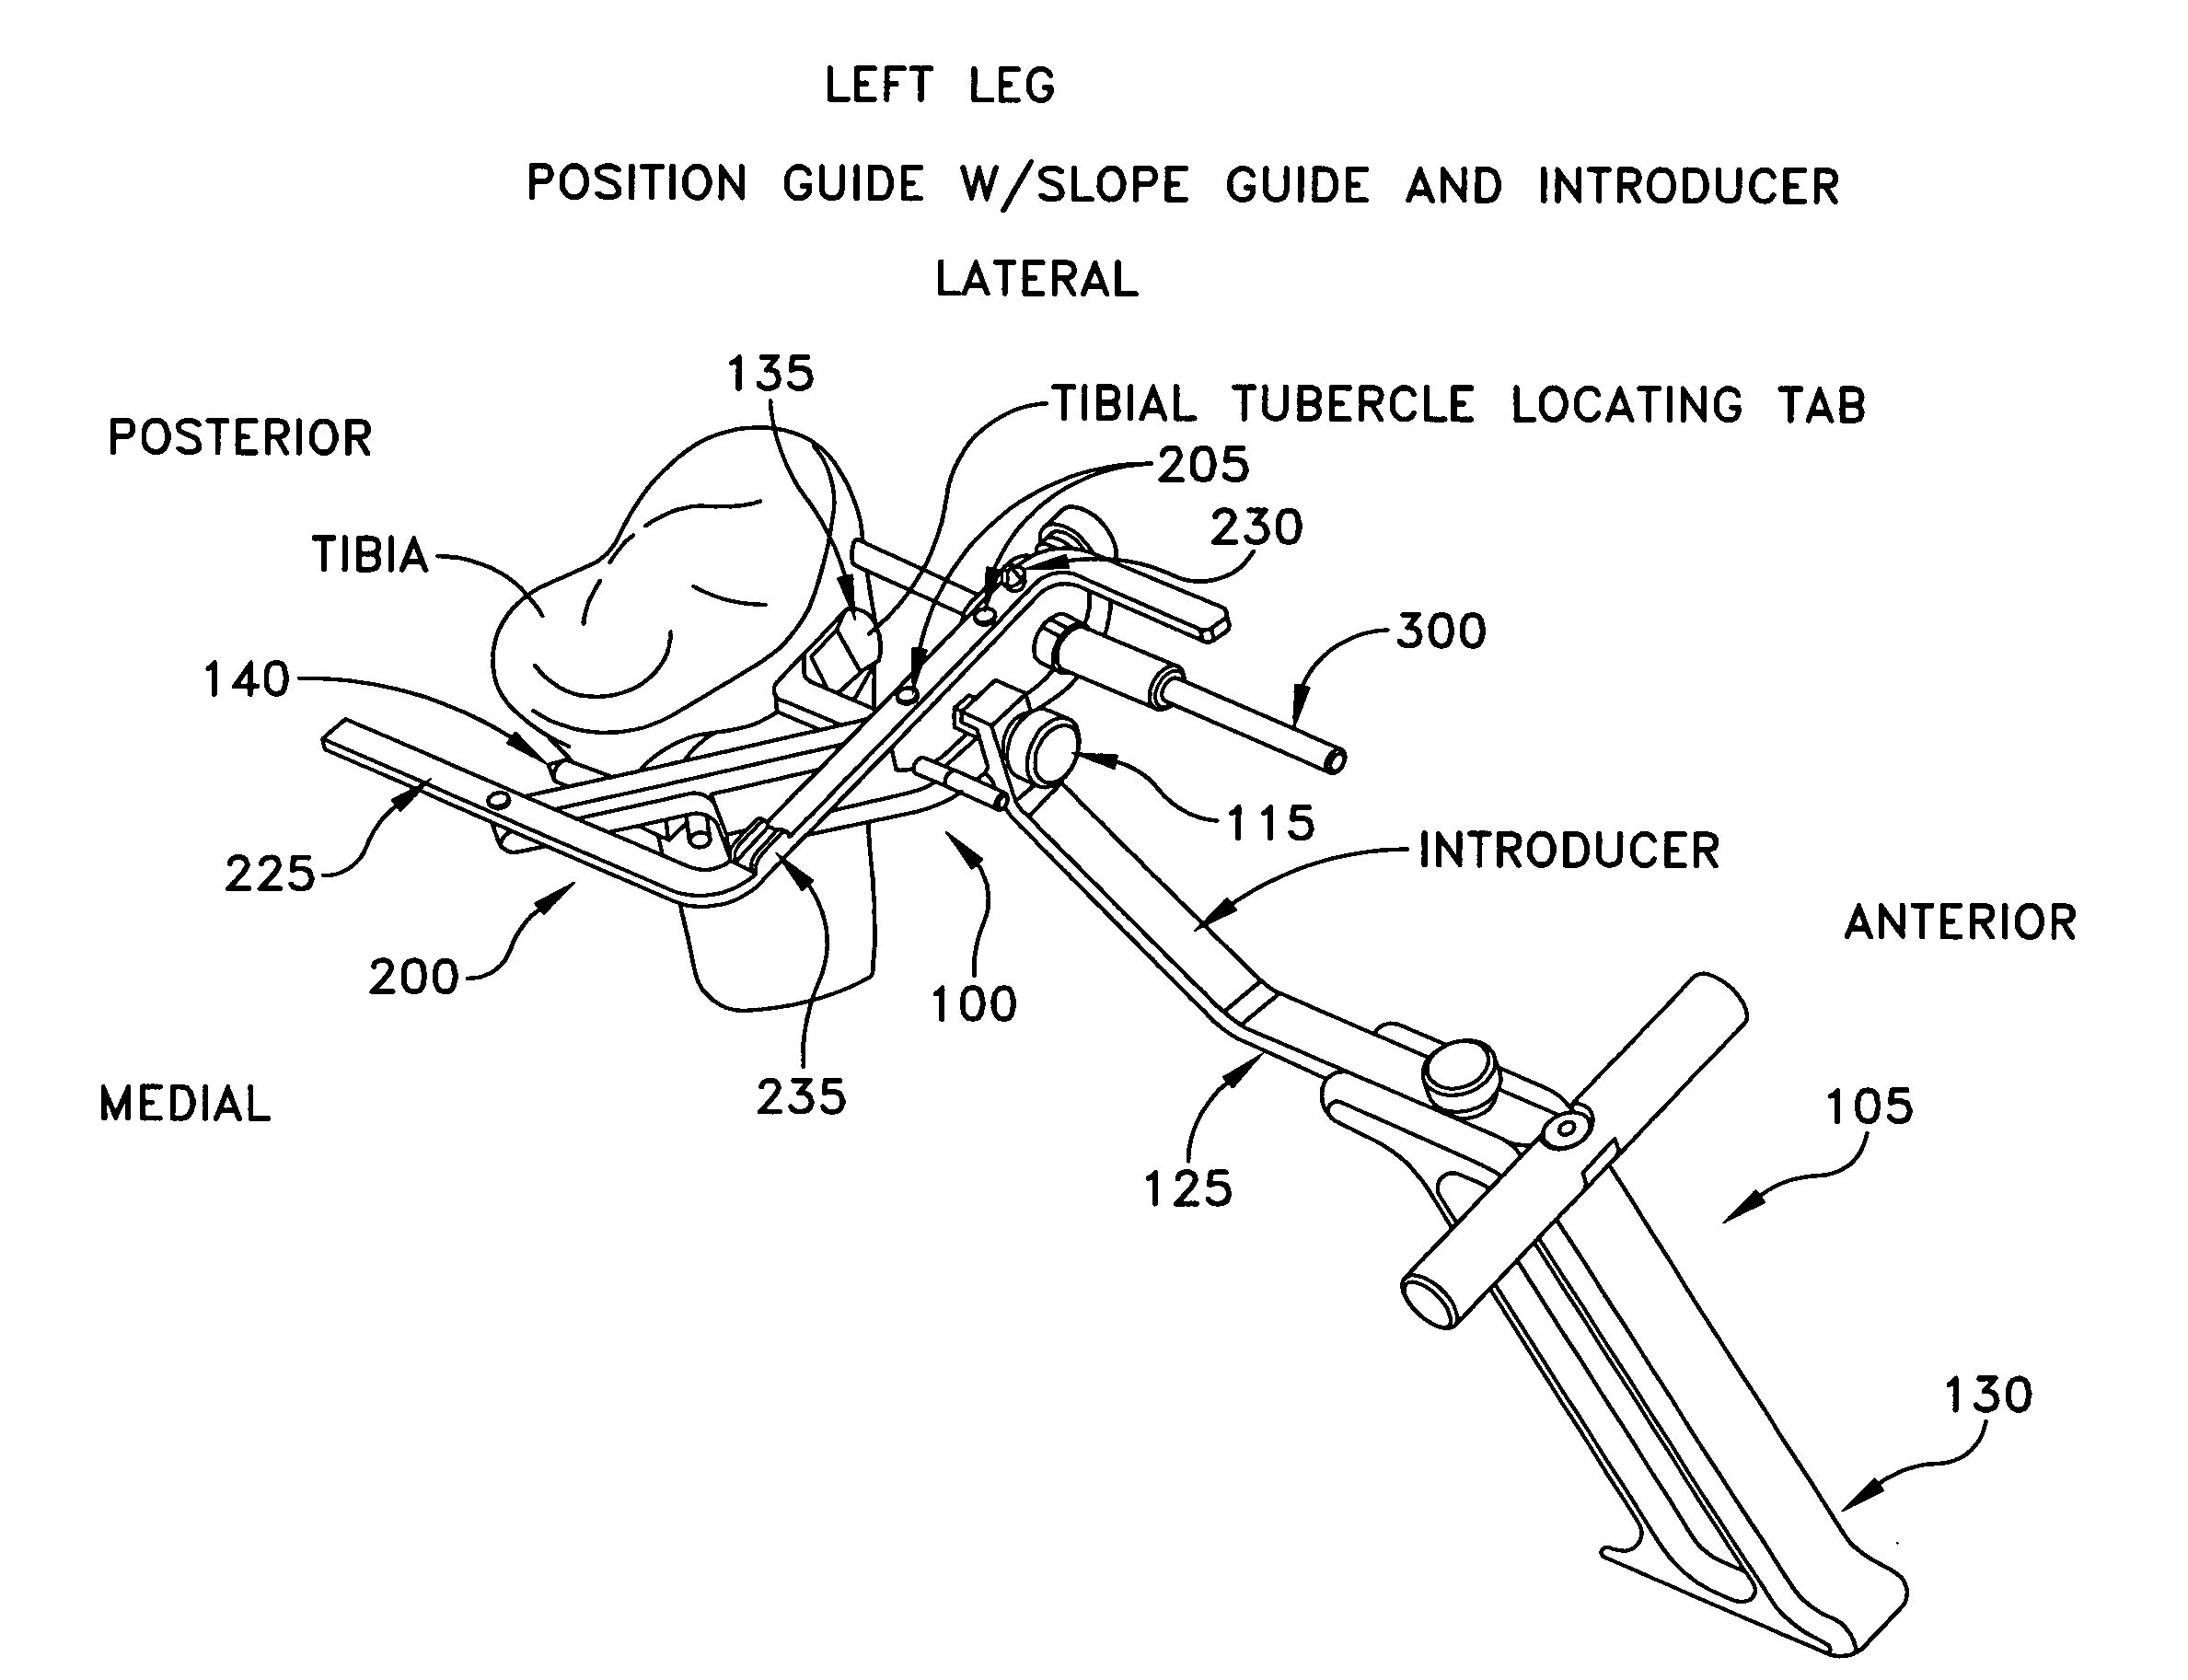 Method and apparatus for performing an open wedge, high tibial osteotomy